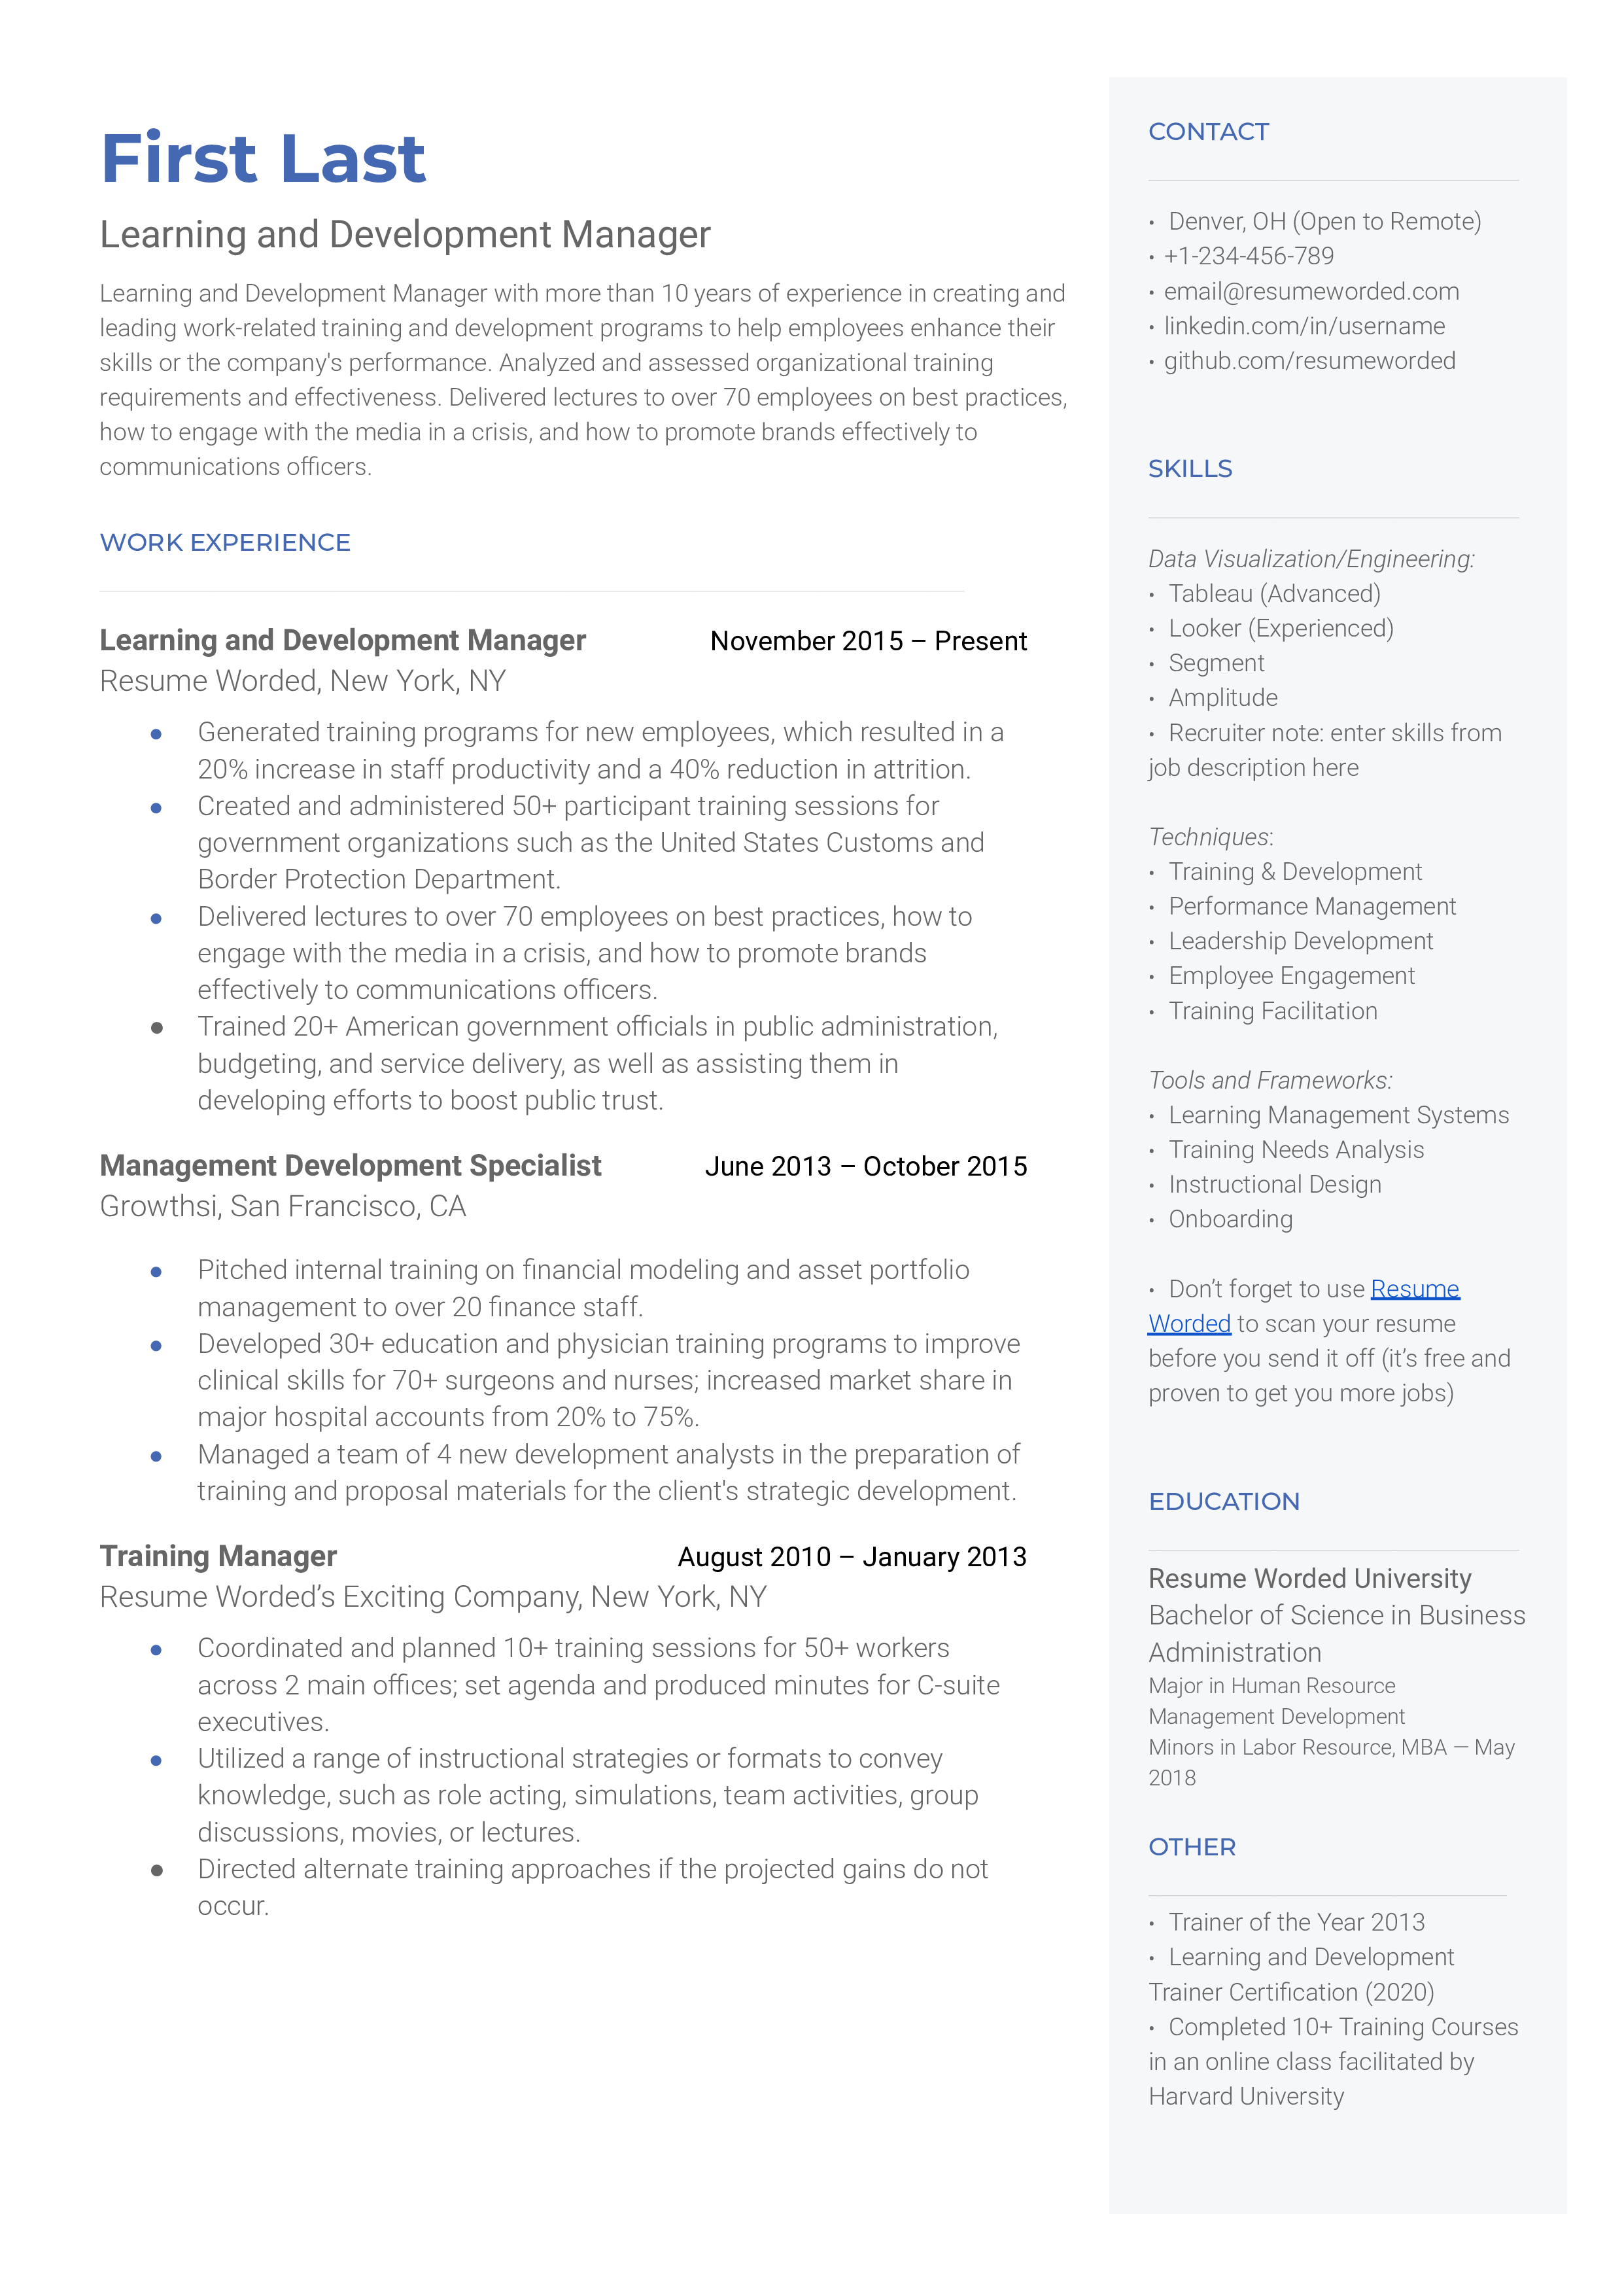 A Learning And Development Manager resume template for 2022 shows what a successful resume looks like to land a job